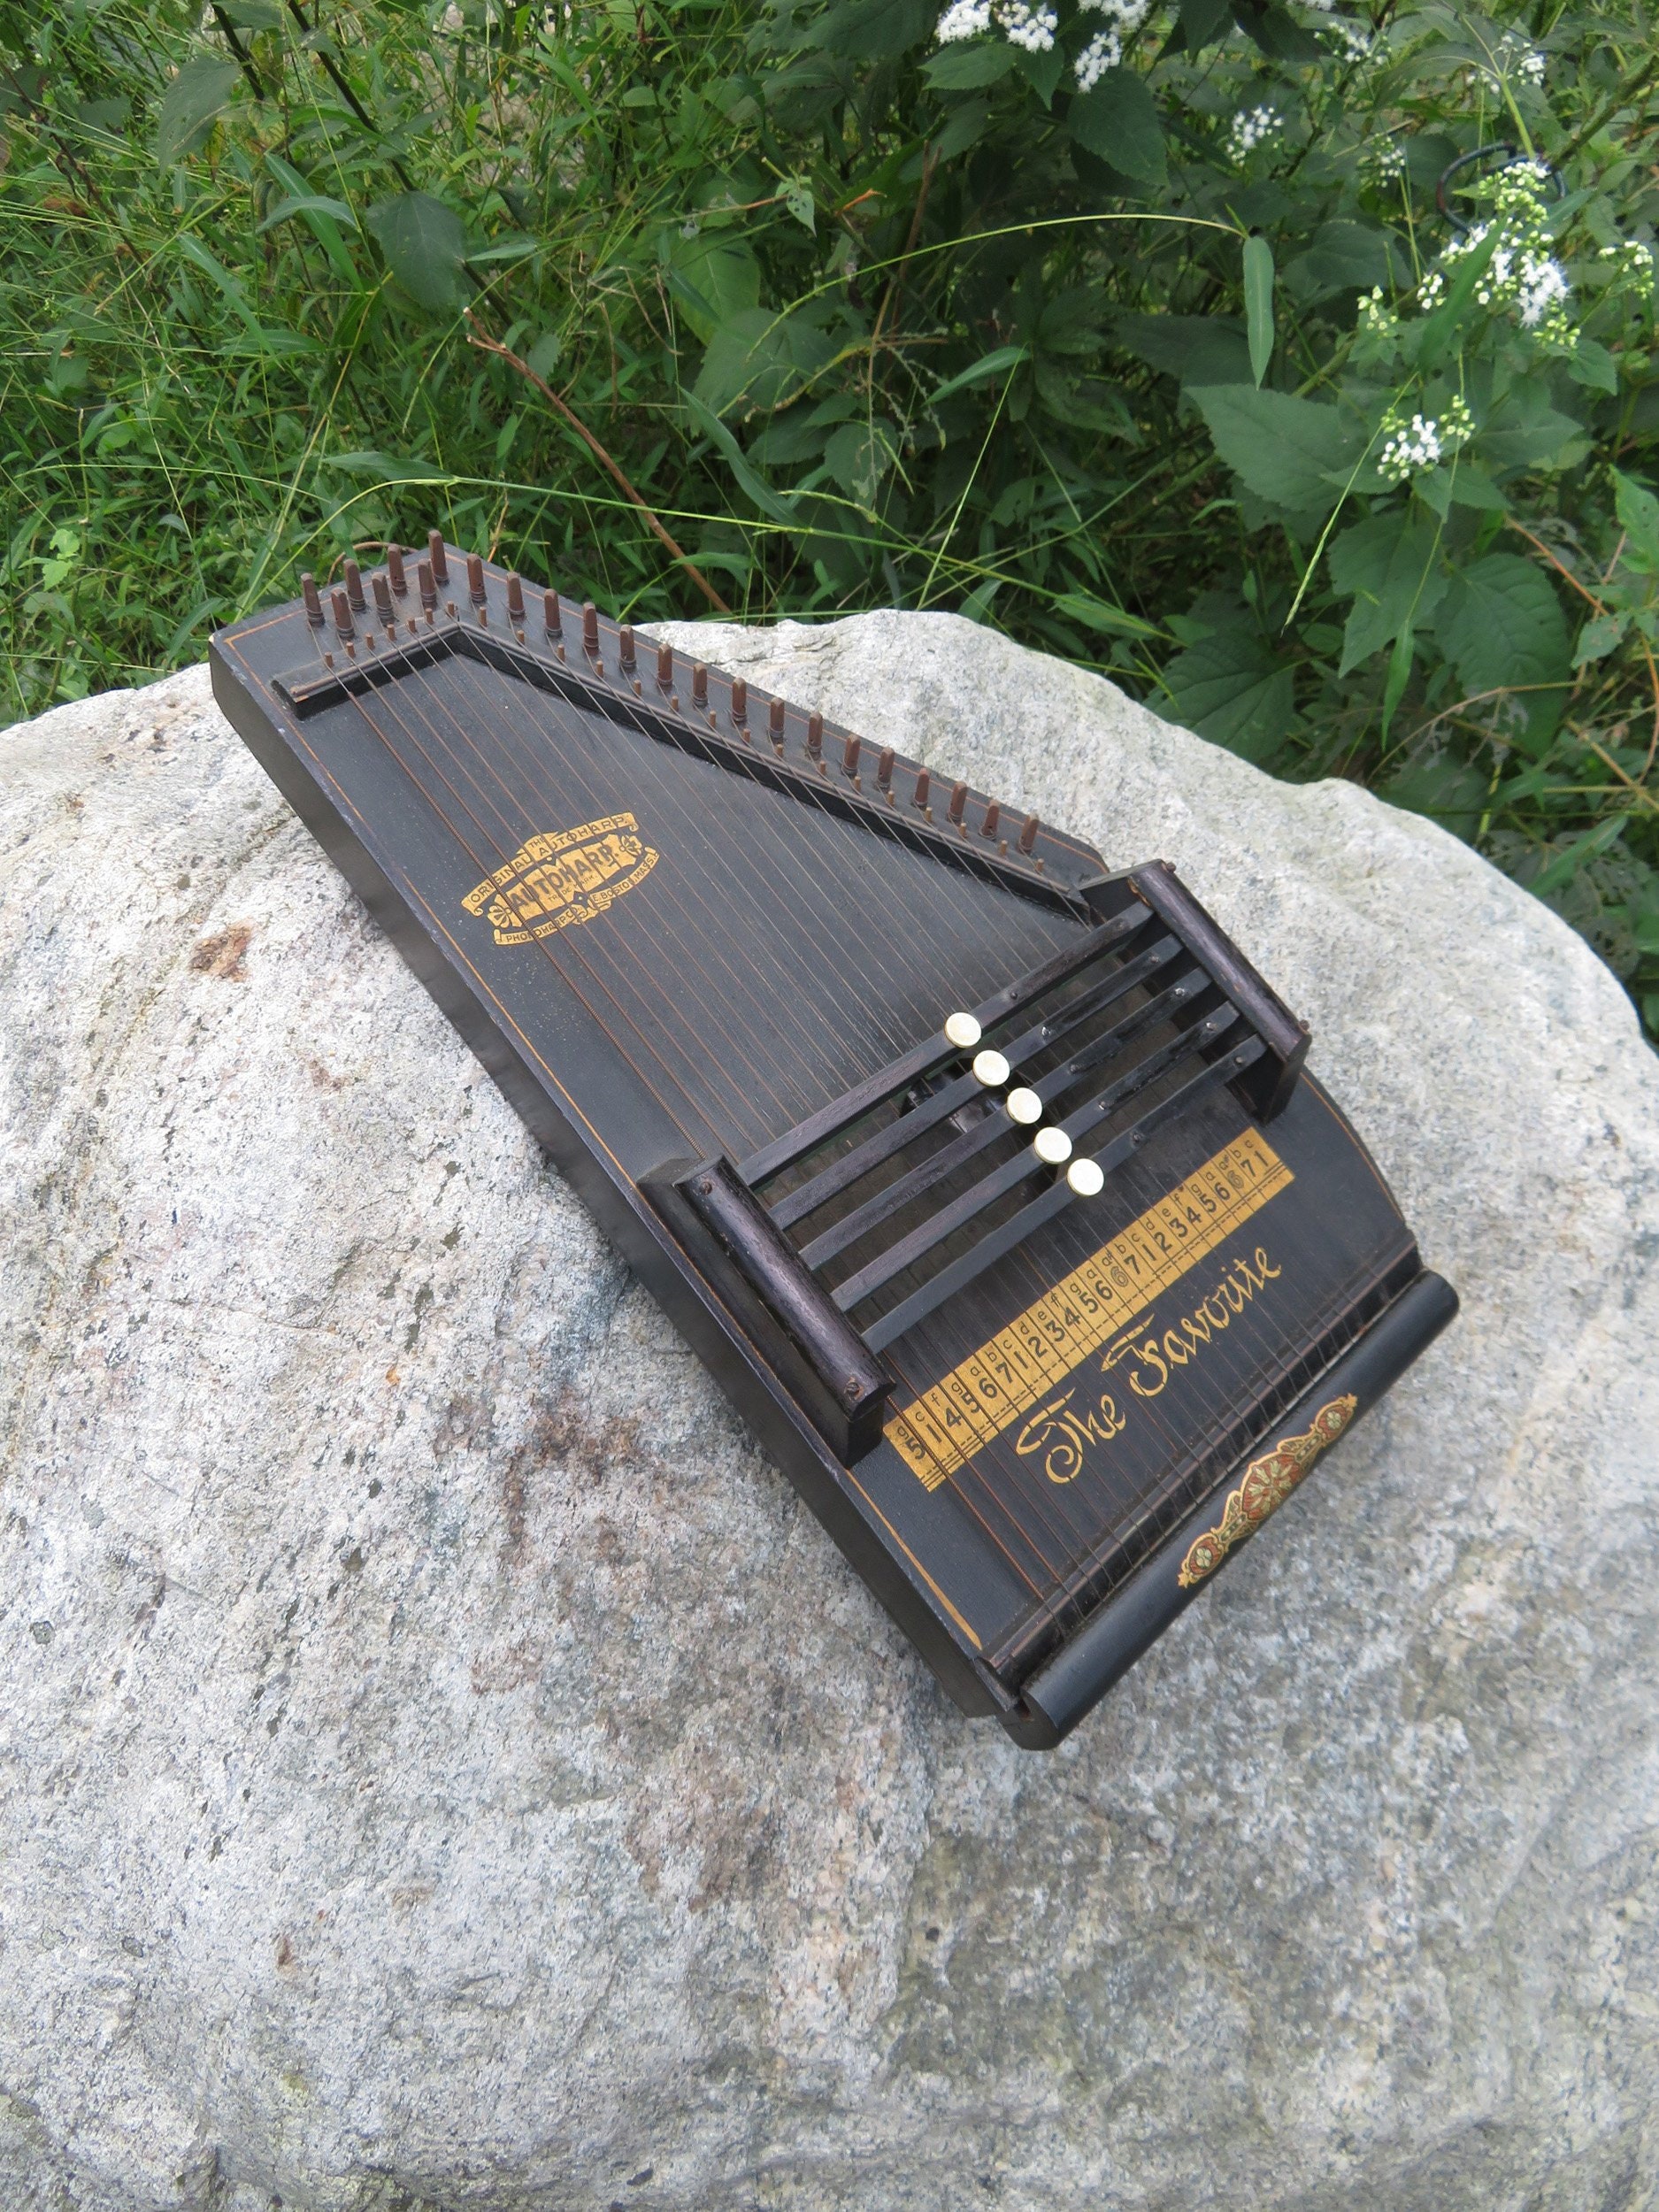 The Favorite Autoharp Early 1900's Antique Instrument - Etsy